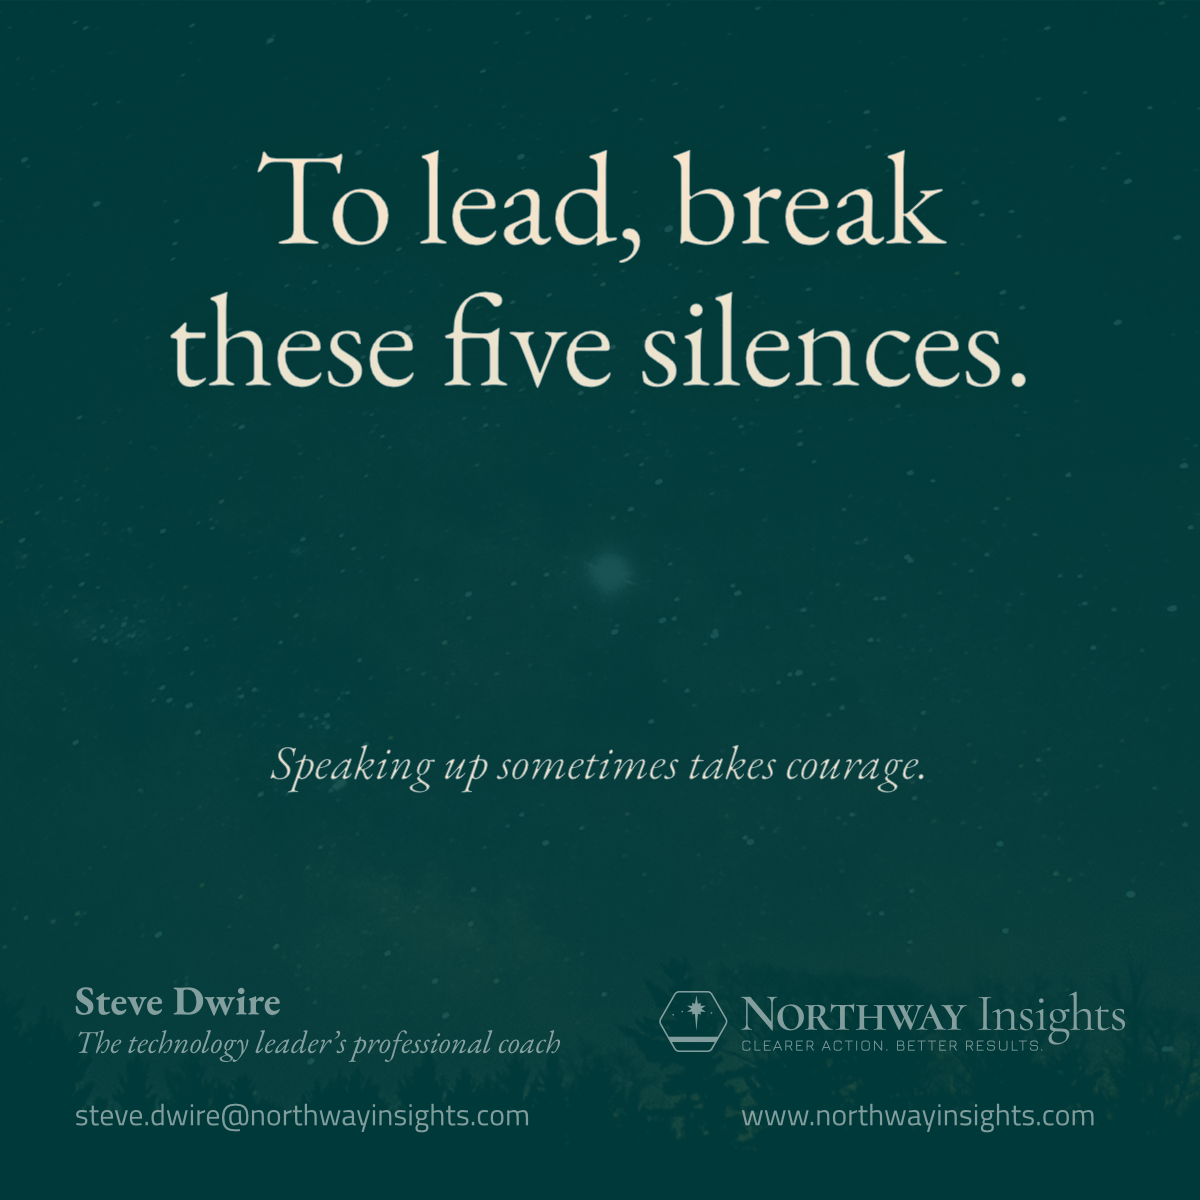 To lead, break these five silences. (Speaking up sometimes takes courage.)